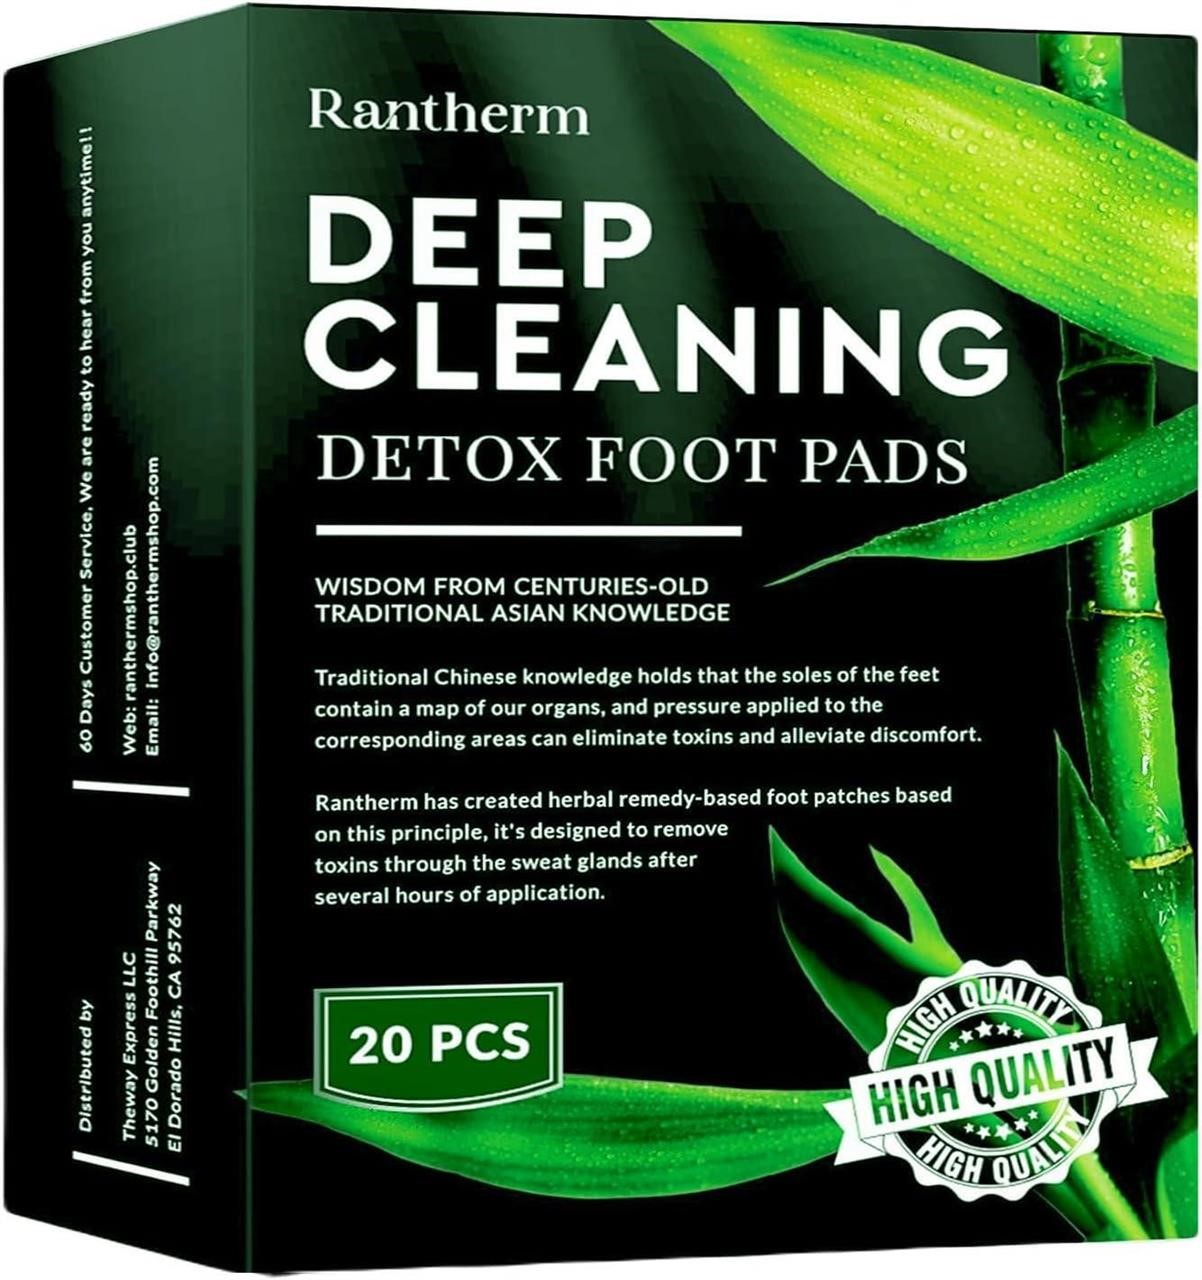 SEALED-20PC Premium Bamboo Ginger Foot Pads x2